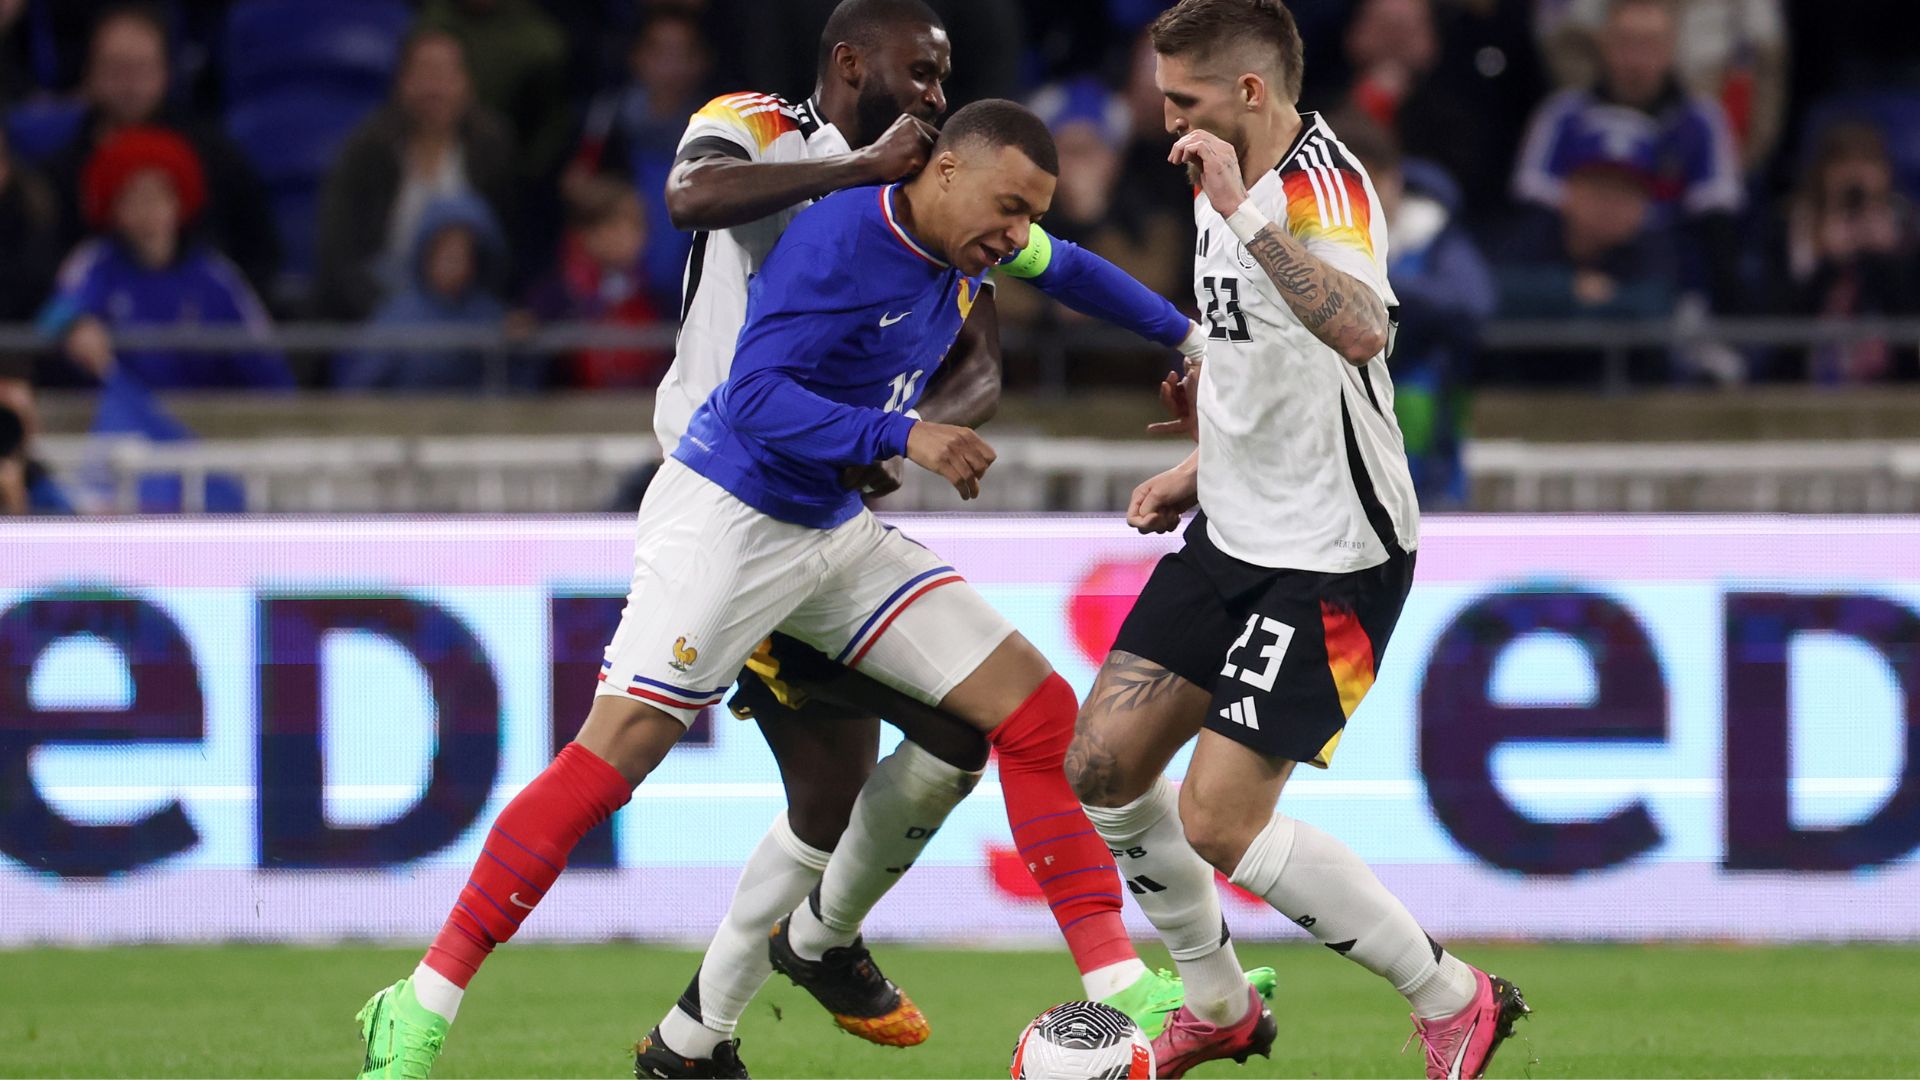 Germany beat France in exhibition